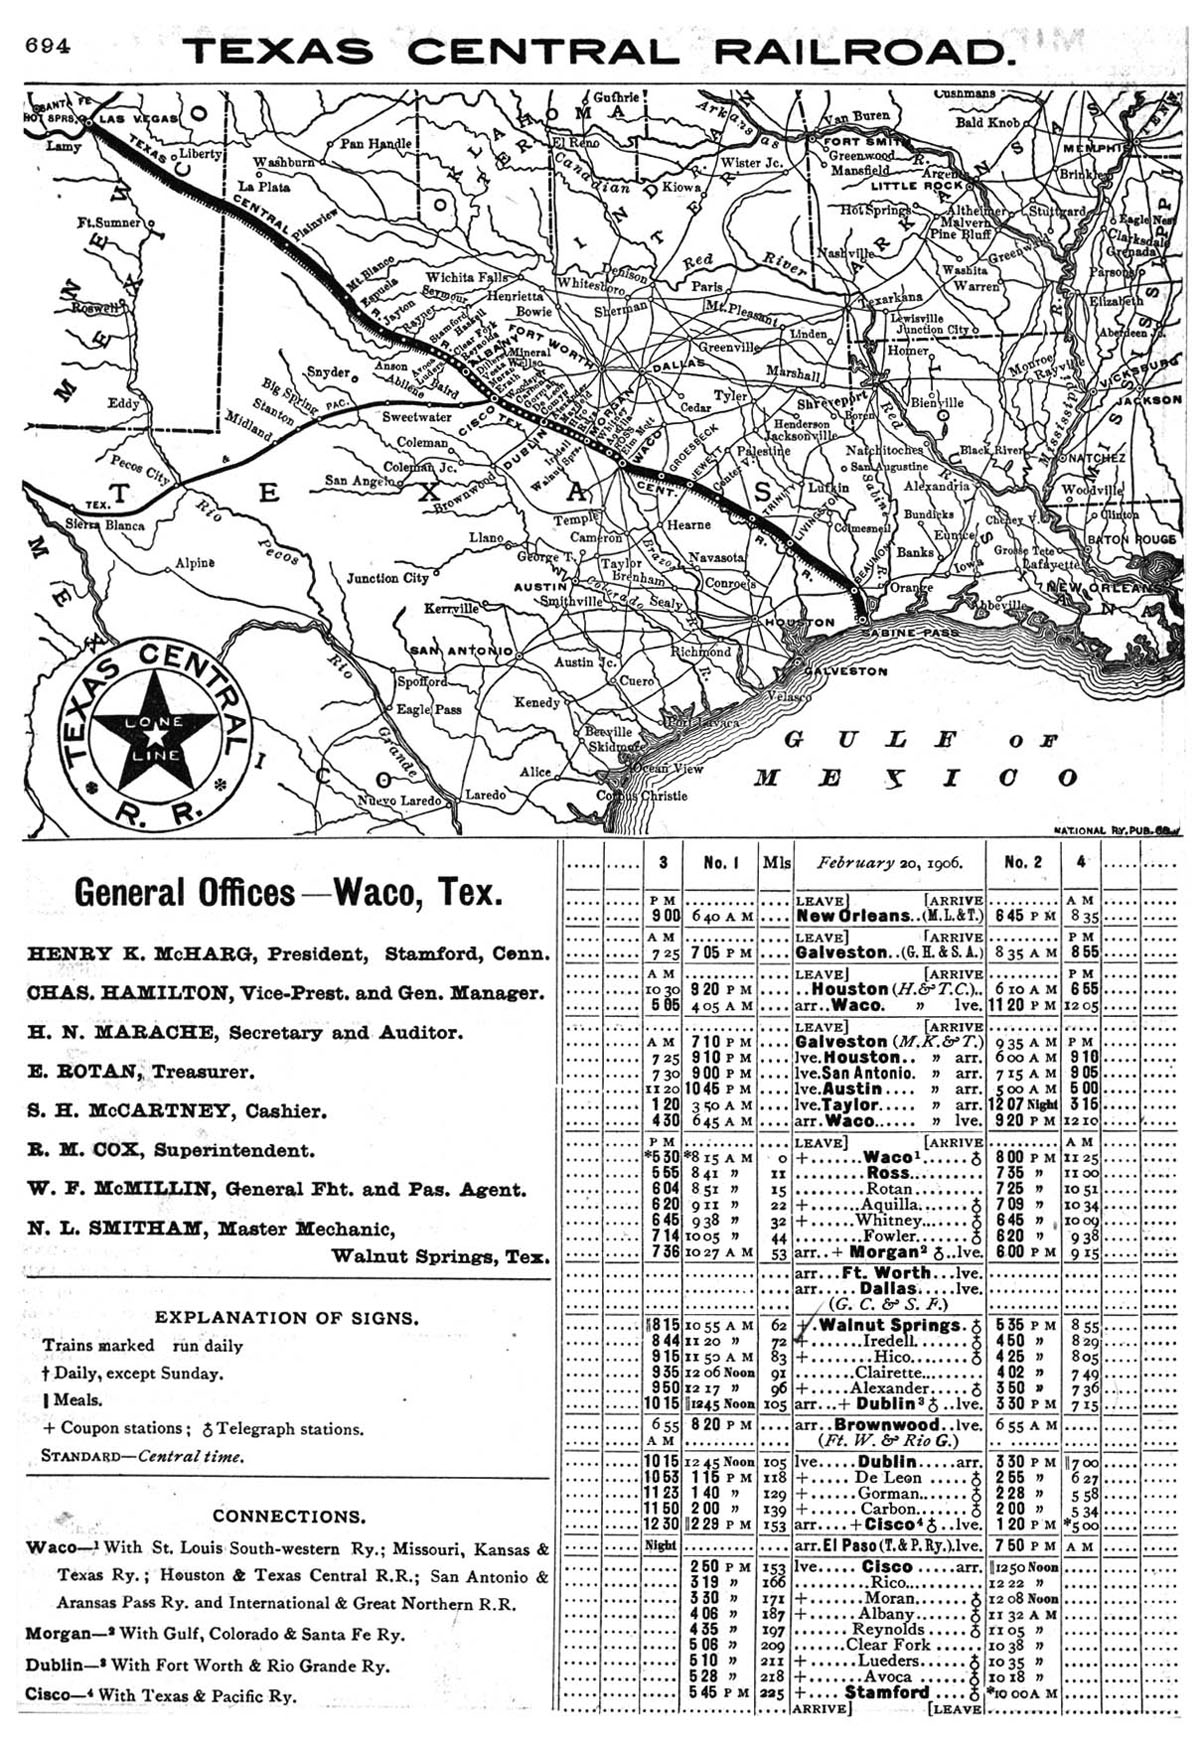 Texas Central Railroad Company (Tex.), Public Timetable and Map Showing Route in 1906.